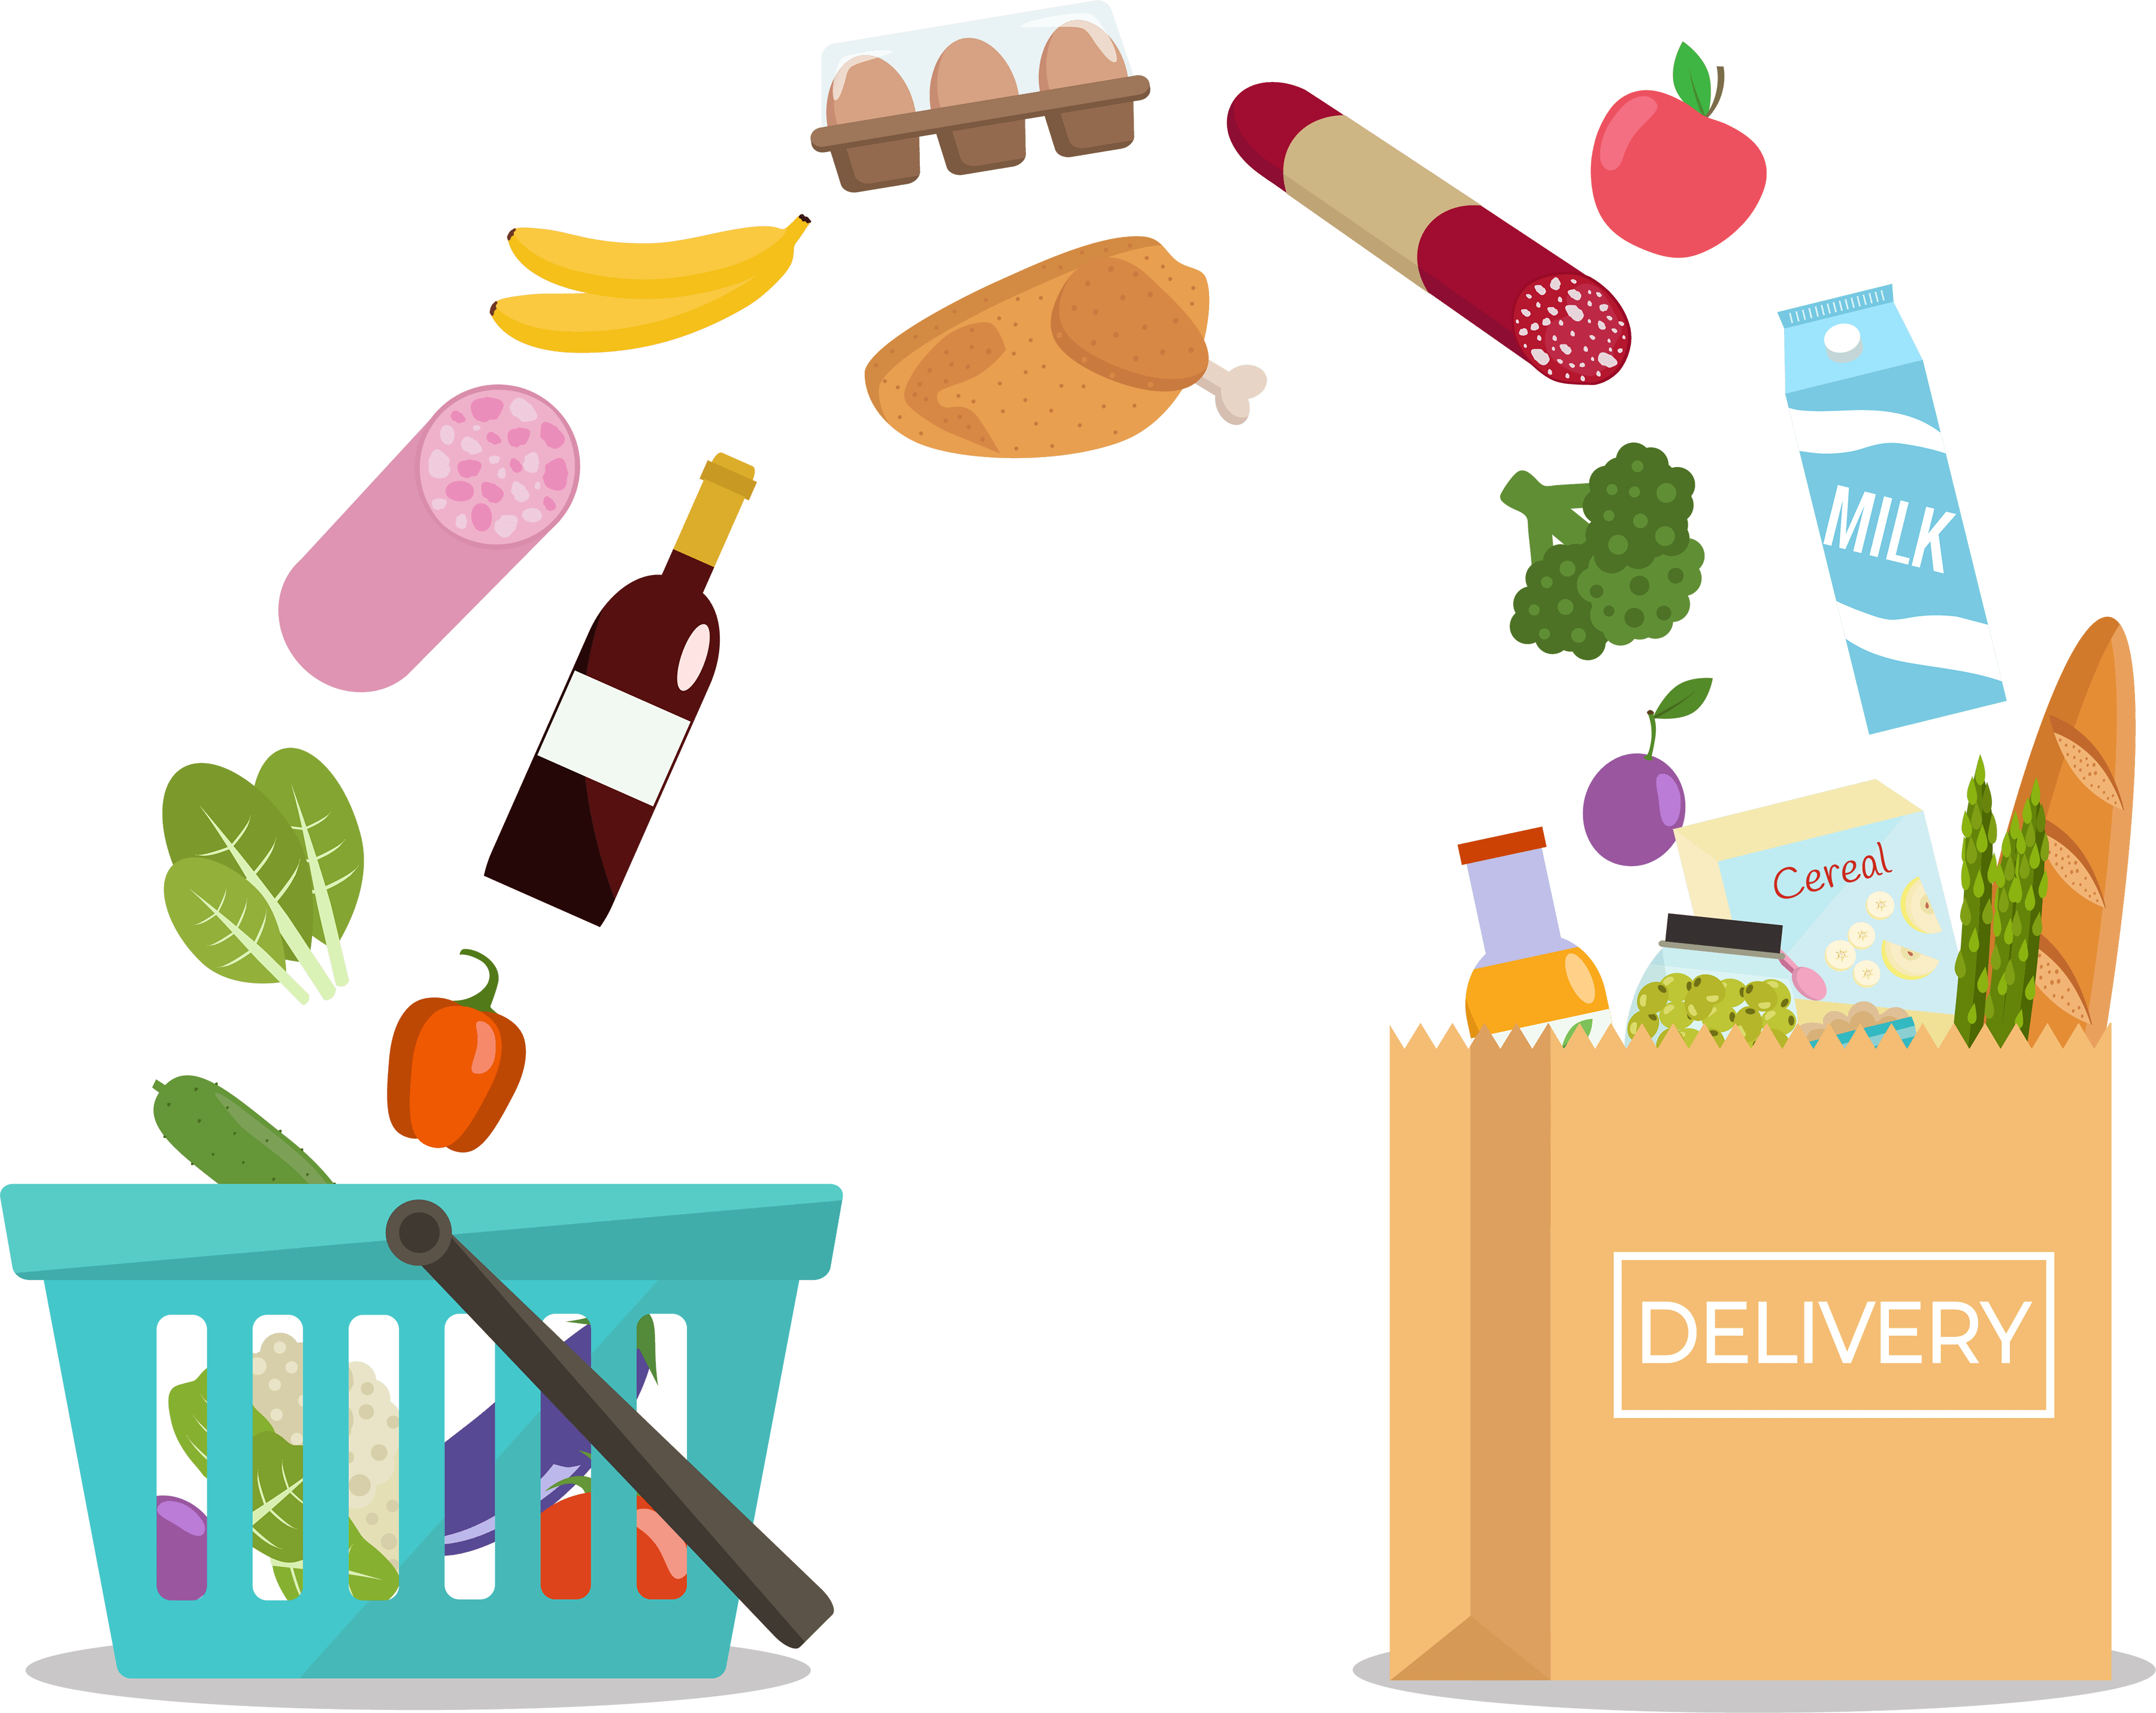 grocery items clipart